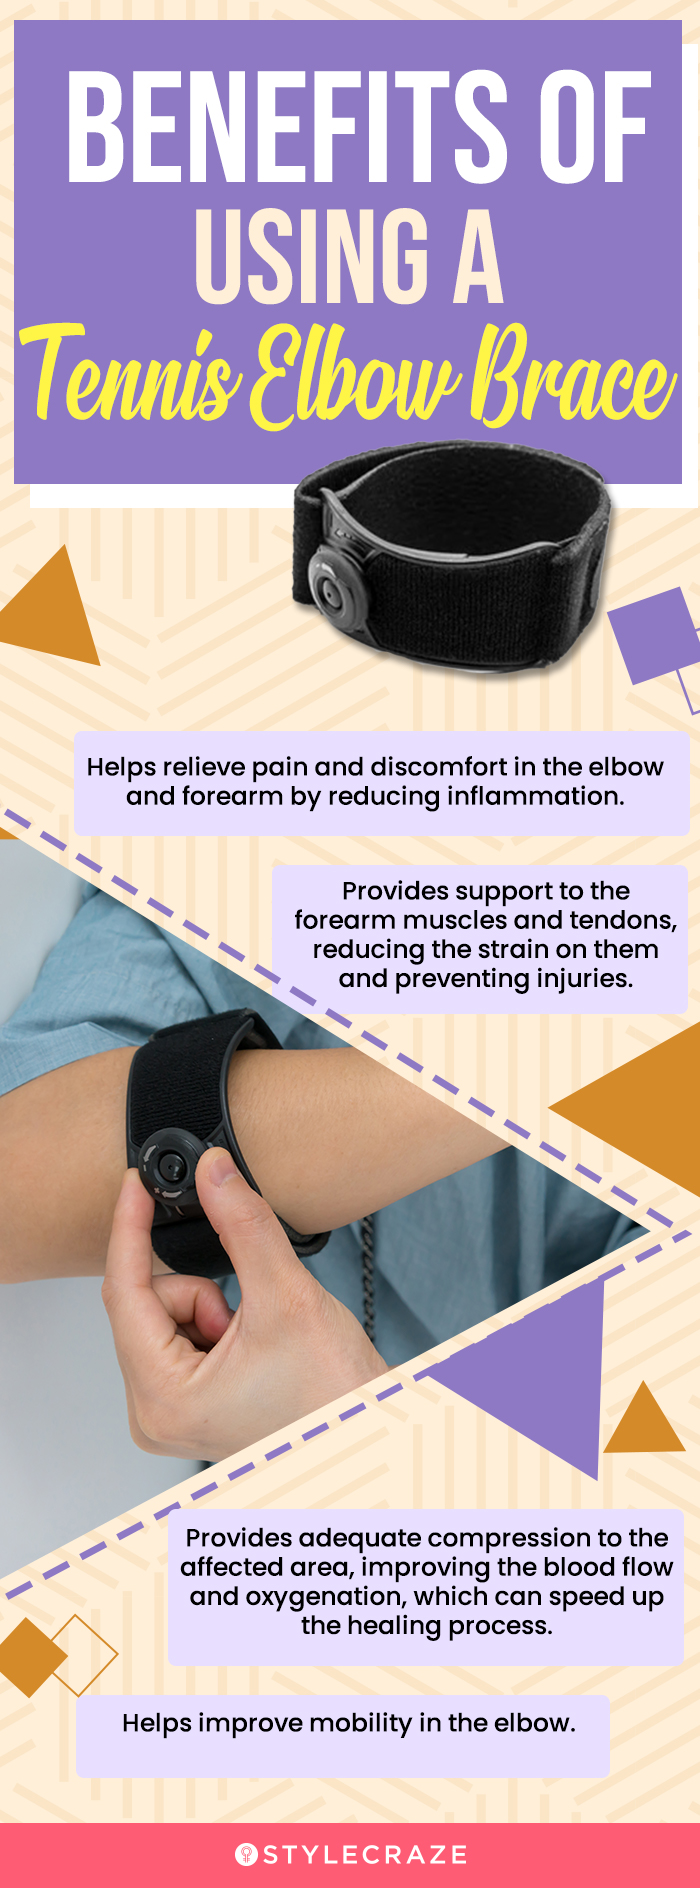 Benefits Of Using A Tennis Elbow Brace (infographic)